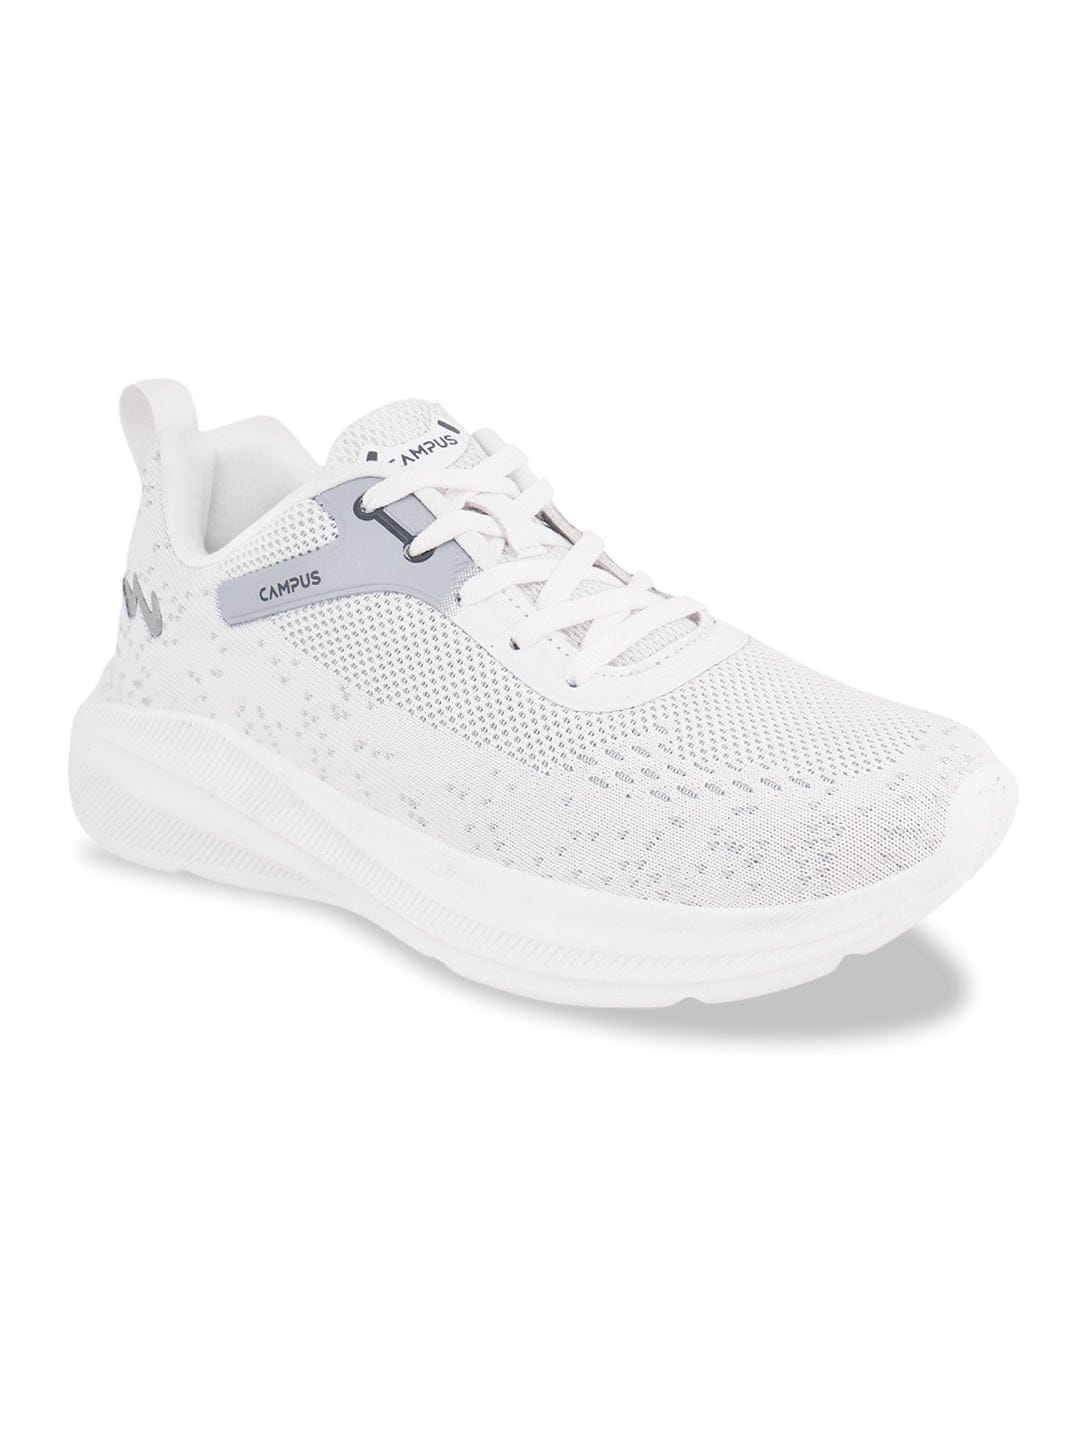 Buy Sports Shoes For Women: Swoop-Full-Wht | Campus Shoes